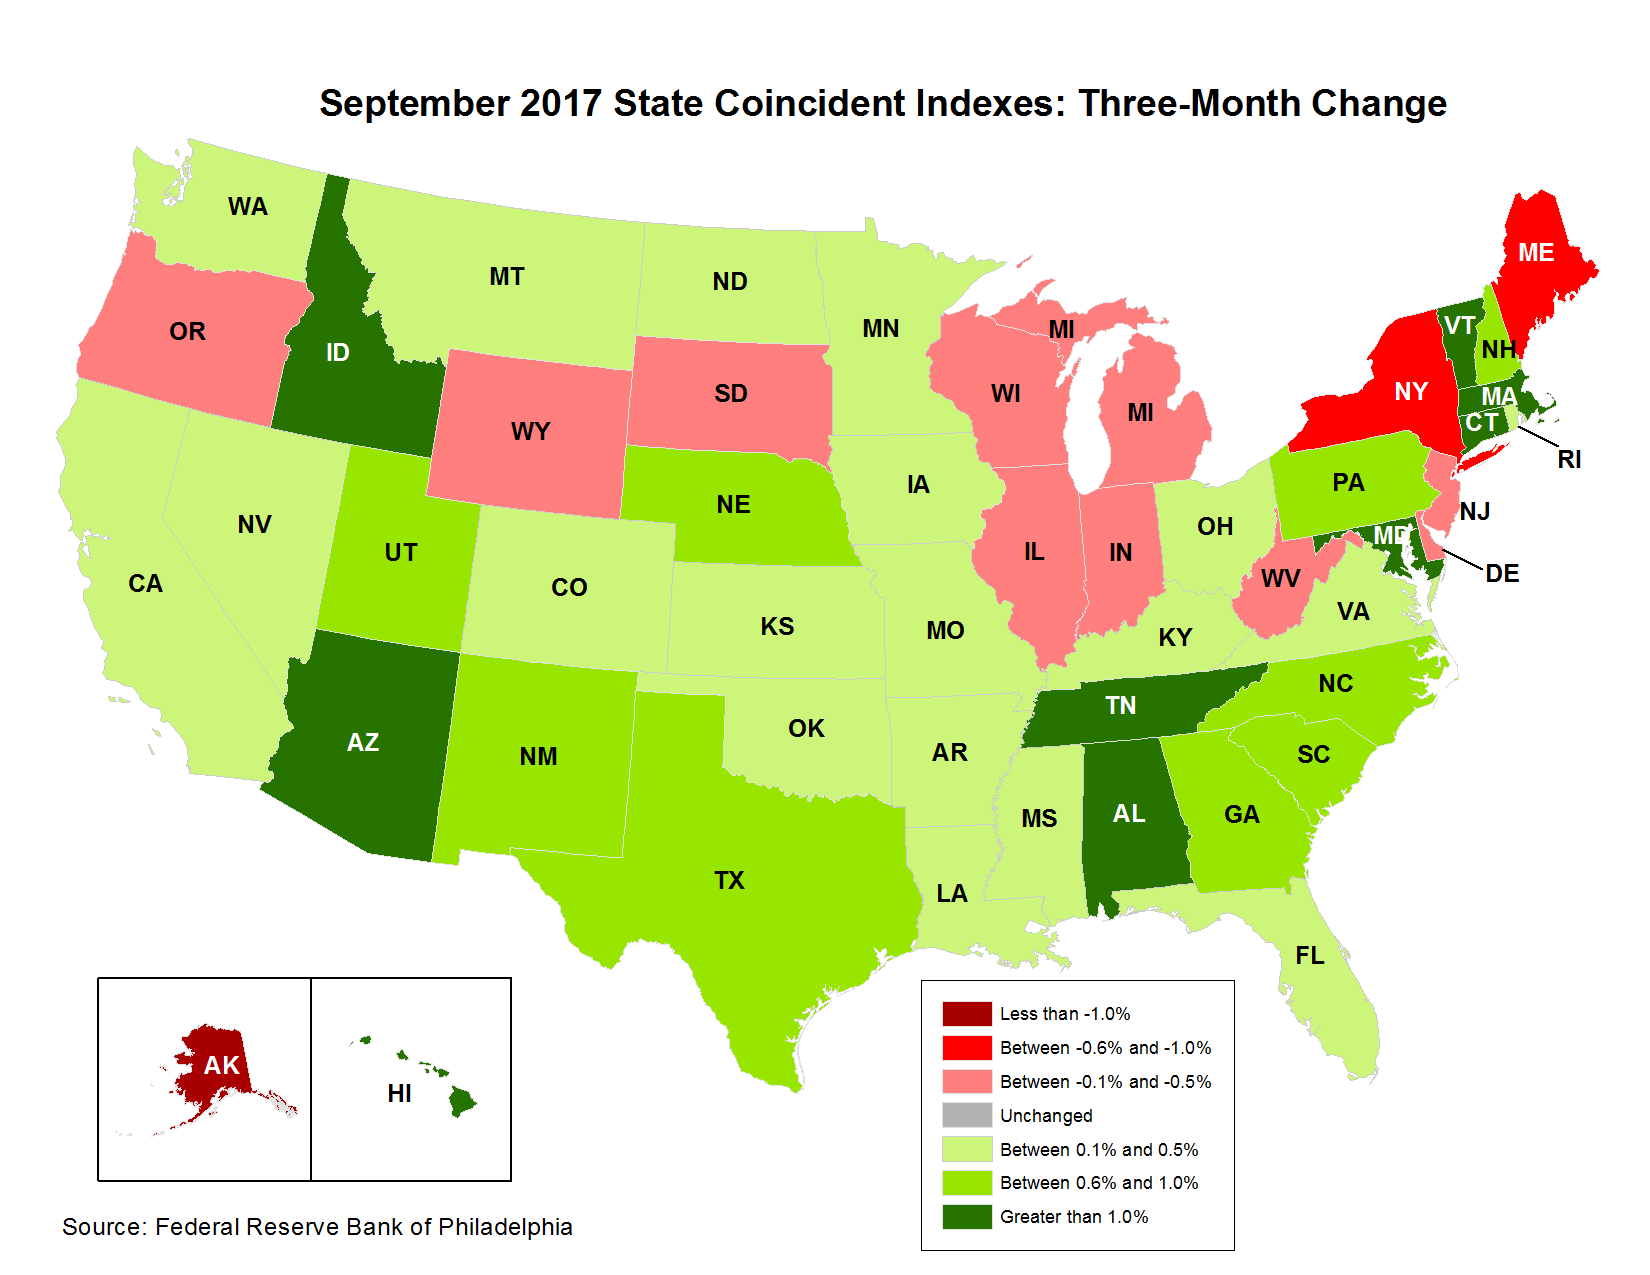 Map of the U.S. showing the State Coincident Indexes Three-Month Change in September 2017